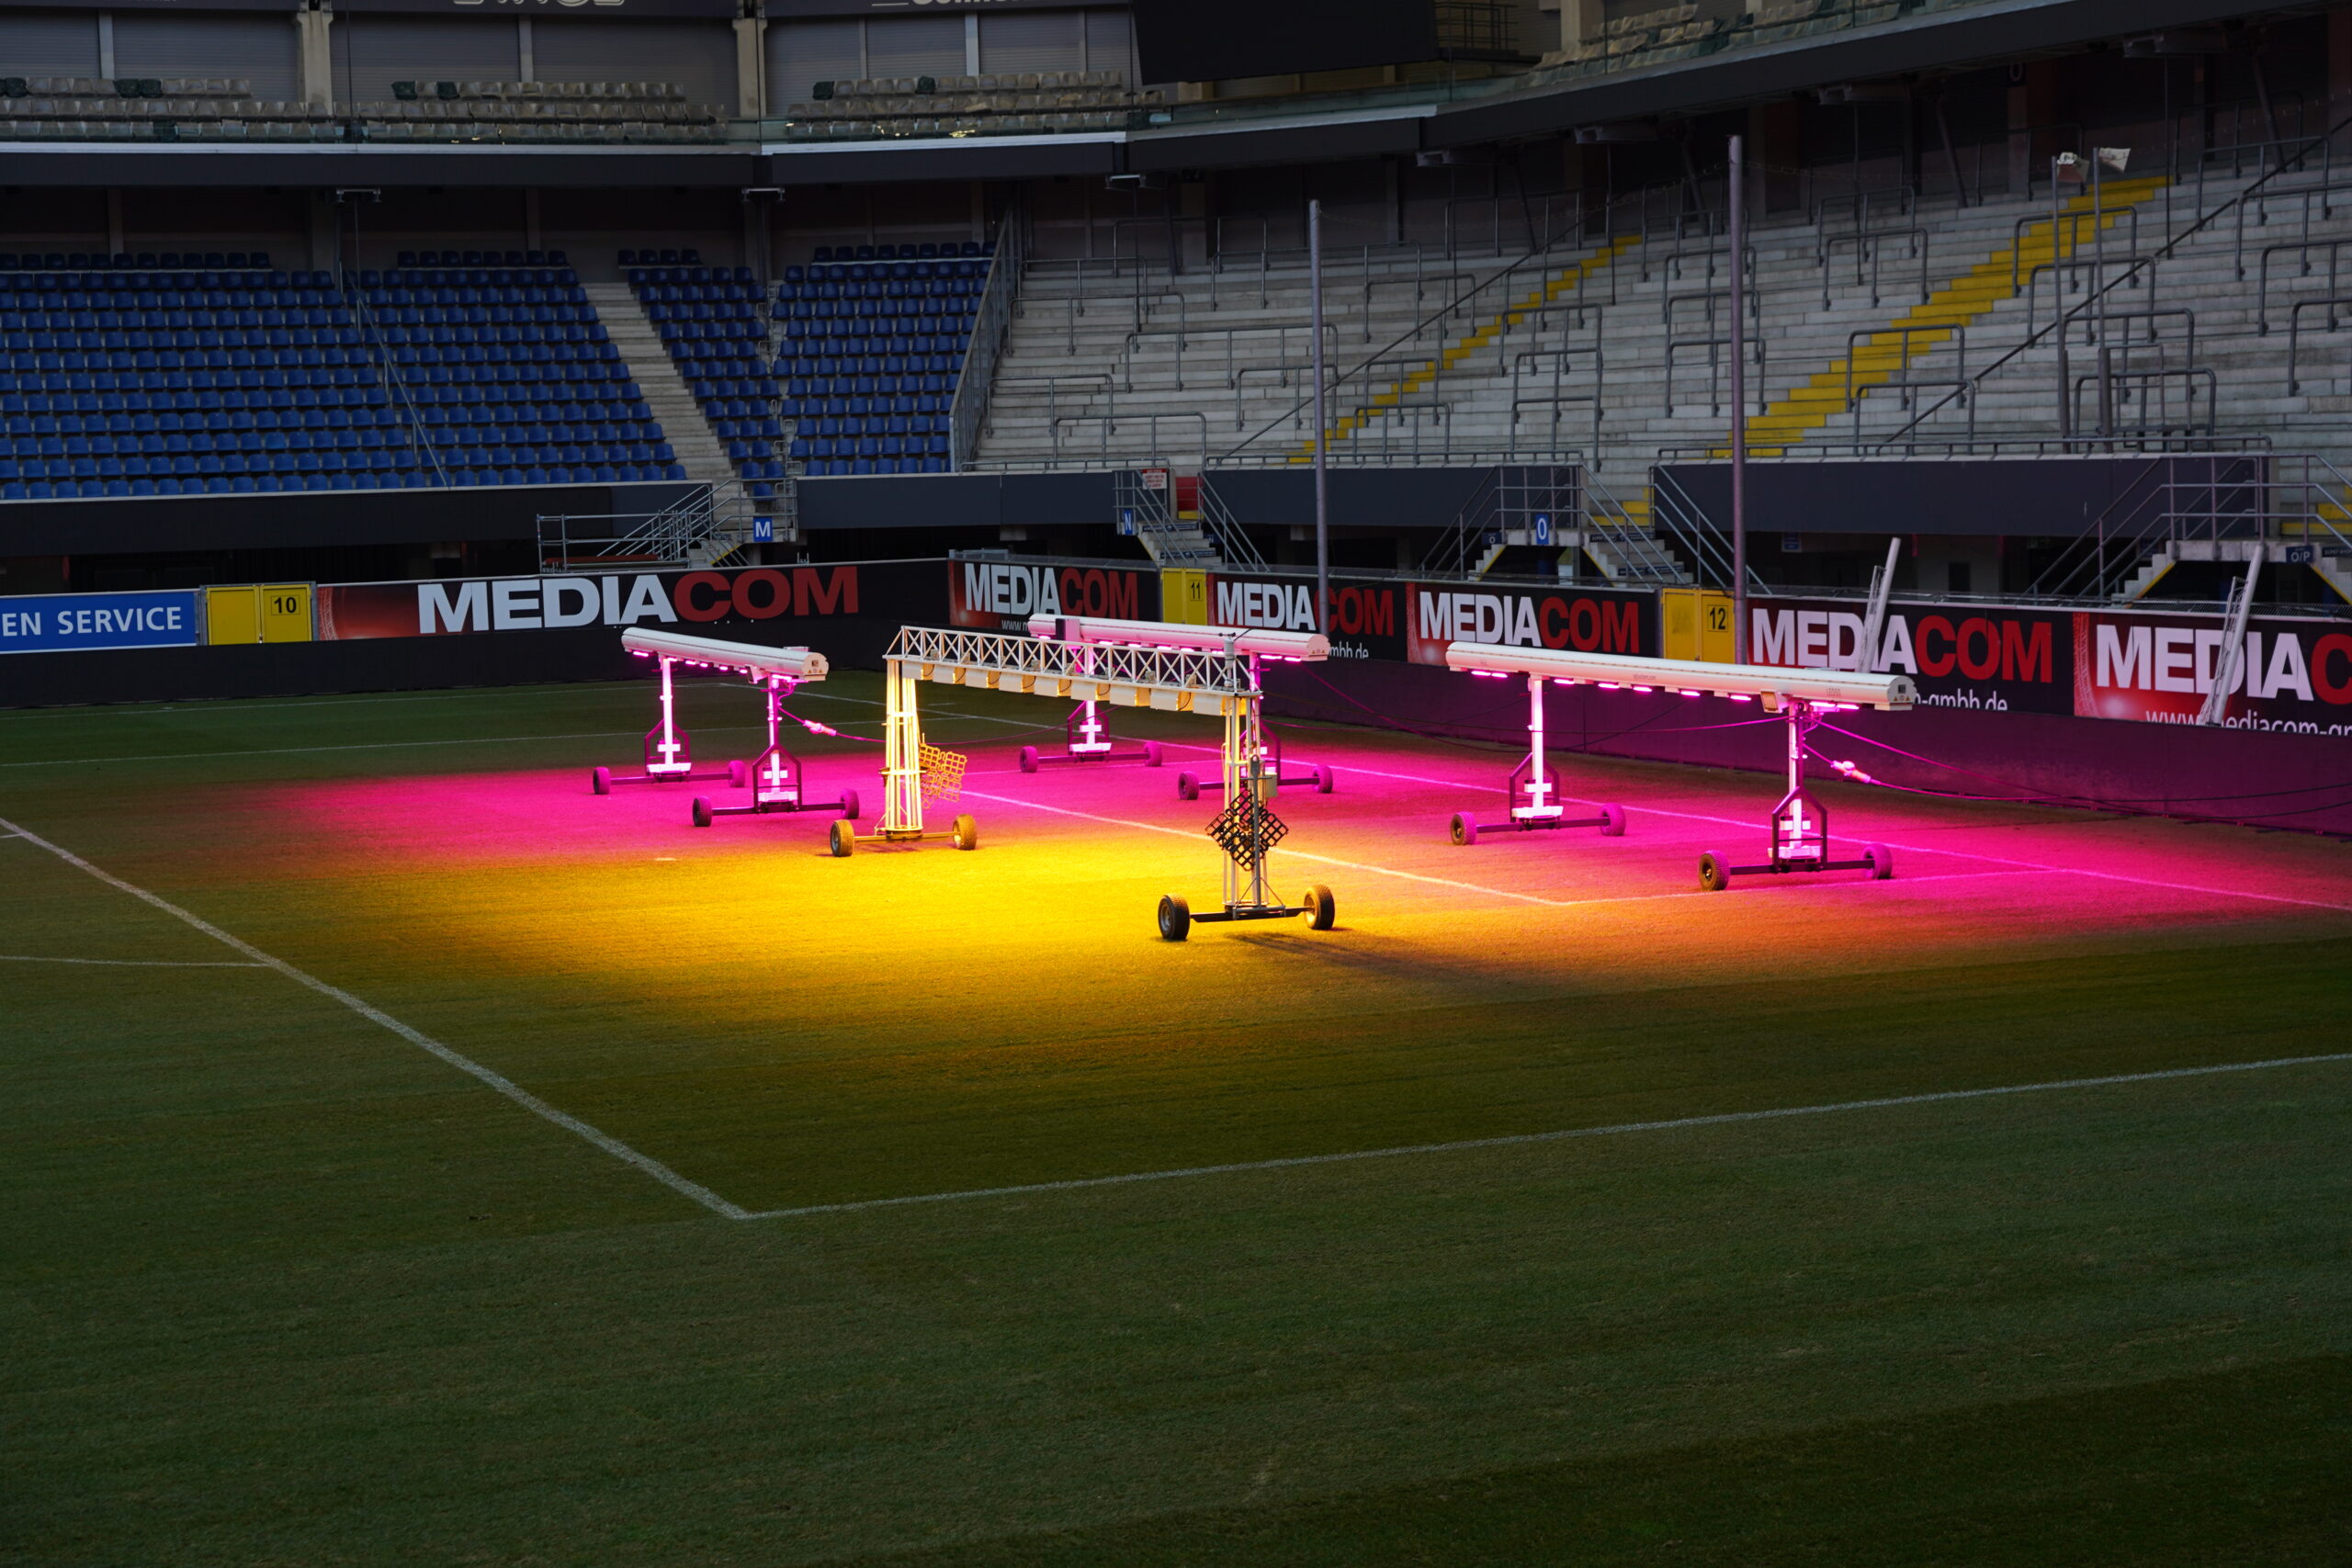 The LED50 grow lighting units and HPS grow lighting unit out on the SC Paderborn stadium pitch.